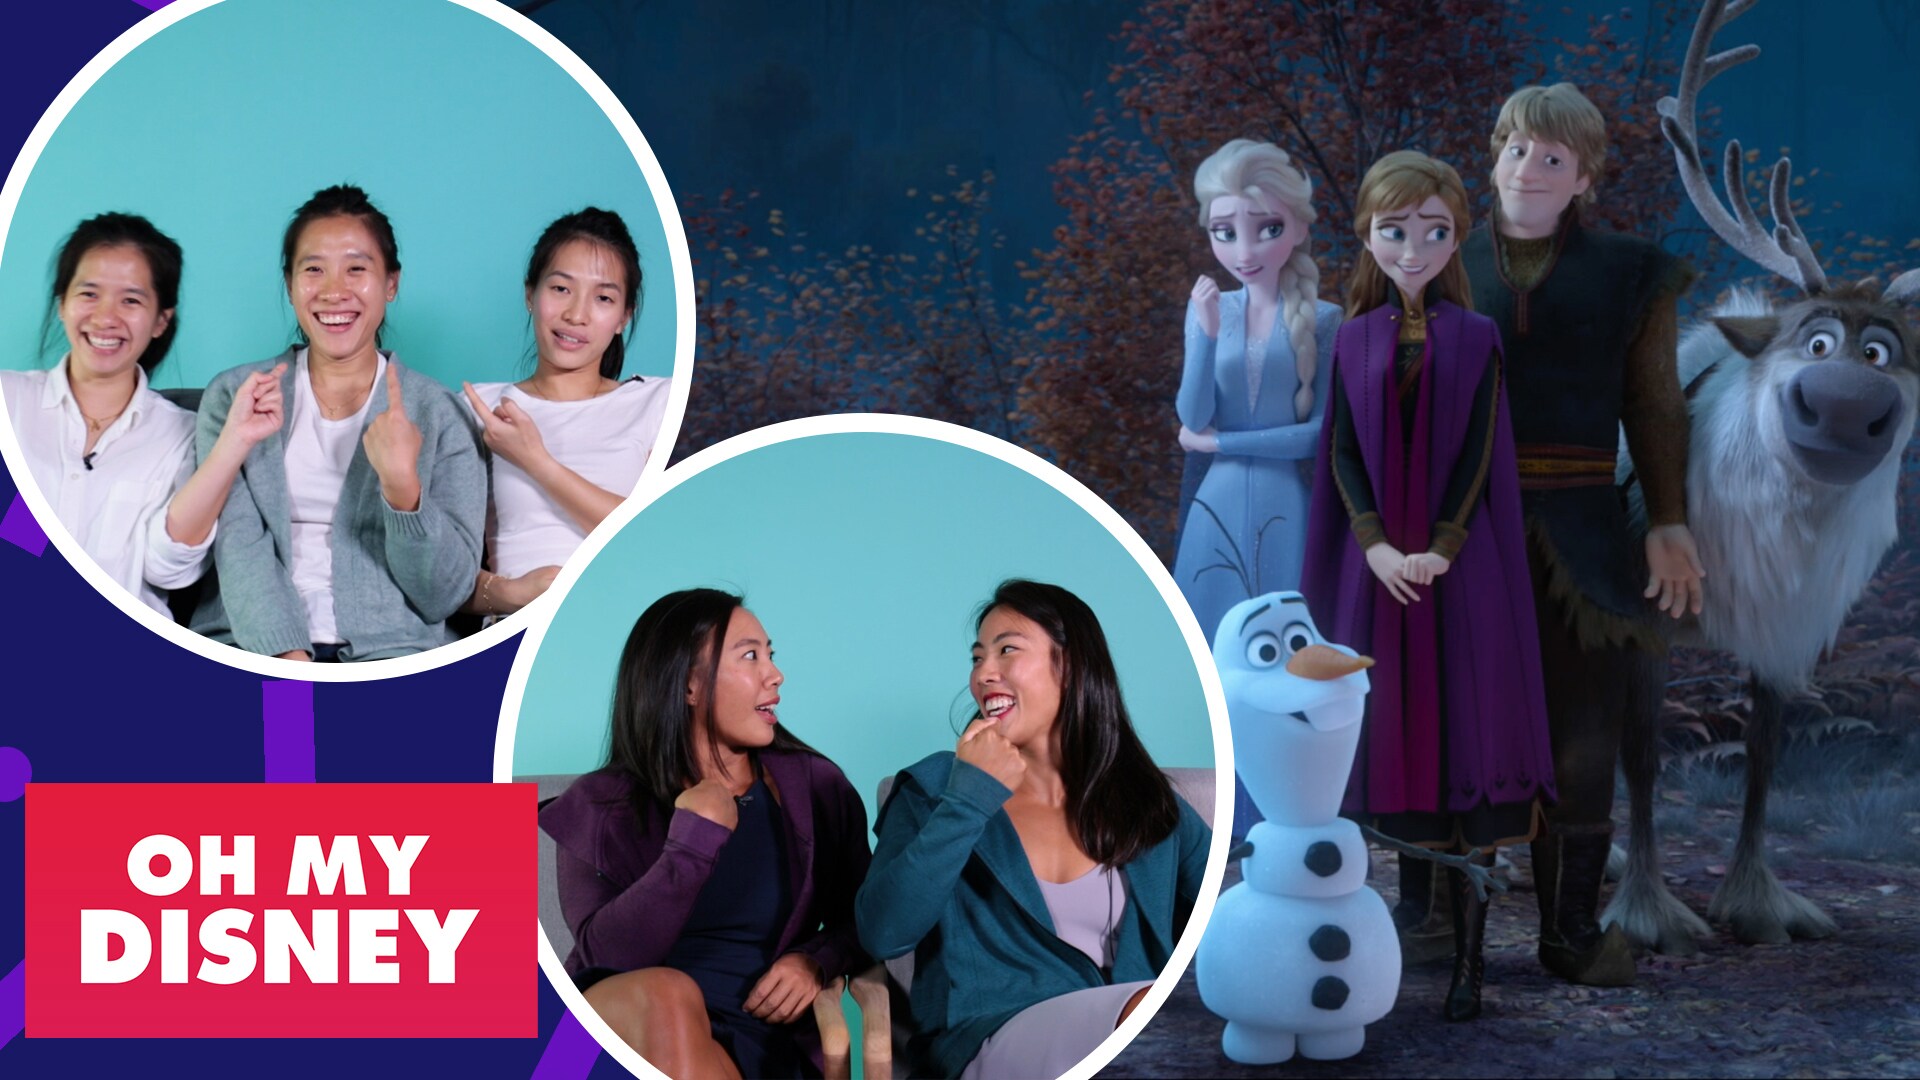 Watch These Athelete Sisters Play A Game of Frozen 2 “Who’s Most Likely To…”!